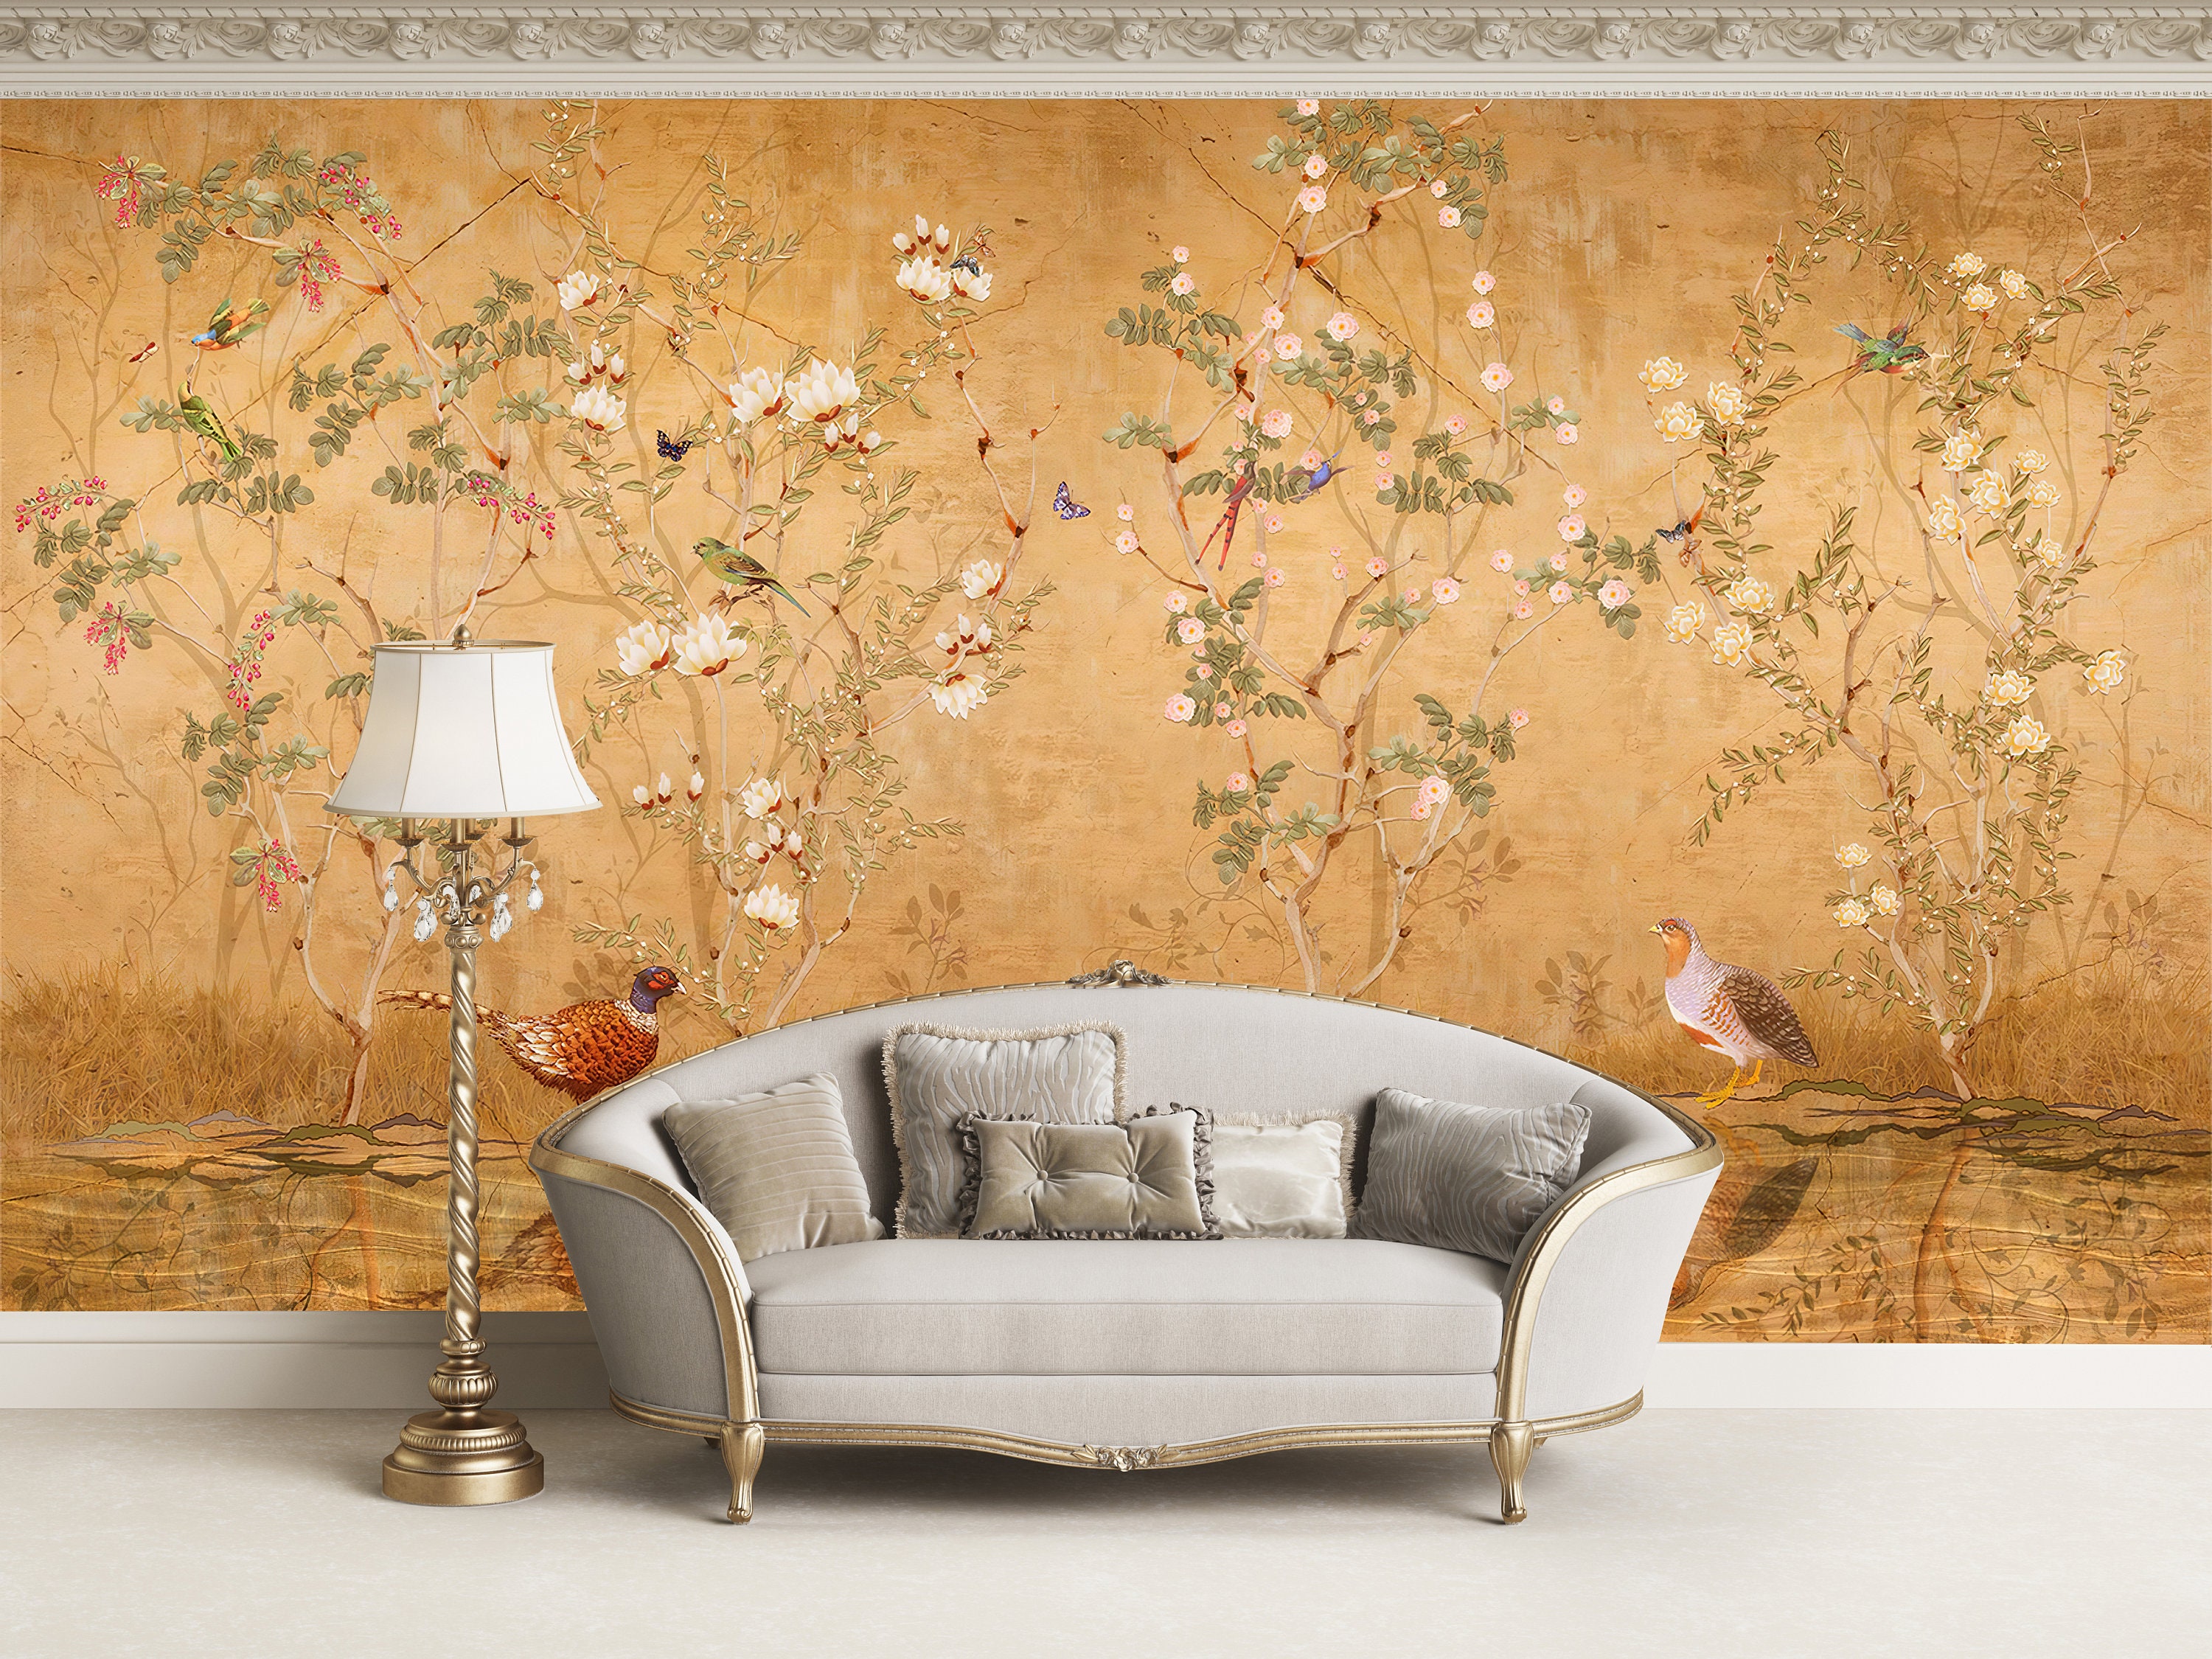 Affordable Chinoiserie Panels and Sources  The Zhush